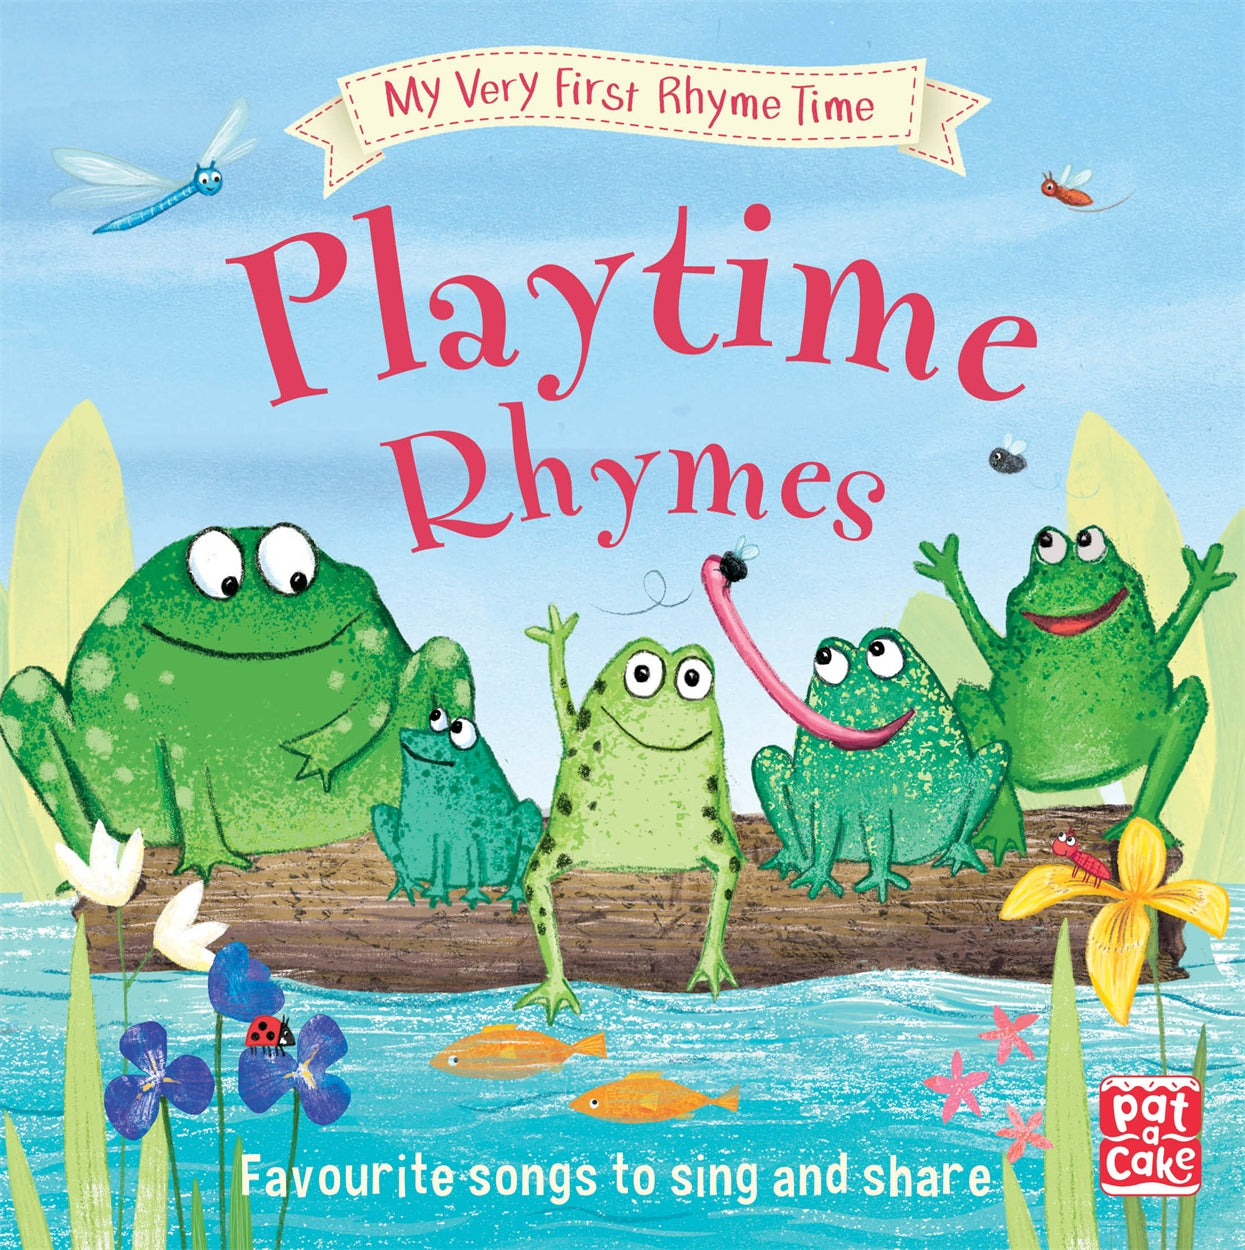 Playtime Rhymes - Pat a Cake (My Very First Rhyme Time) Hardcover Book